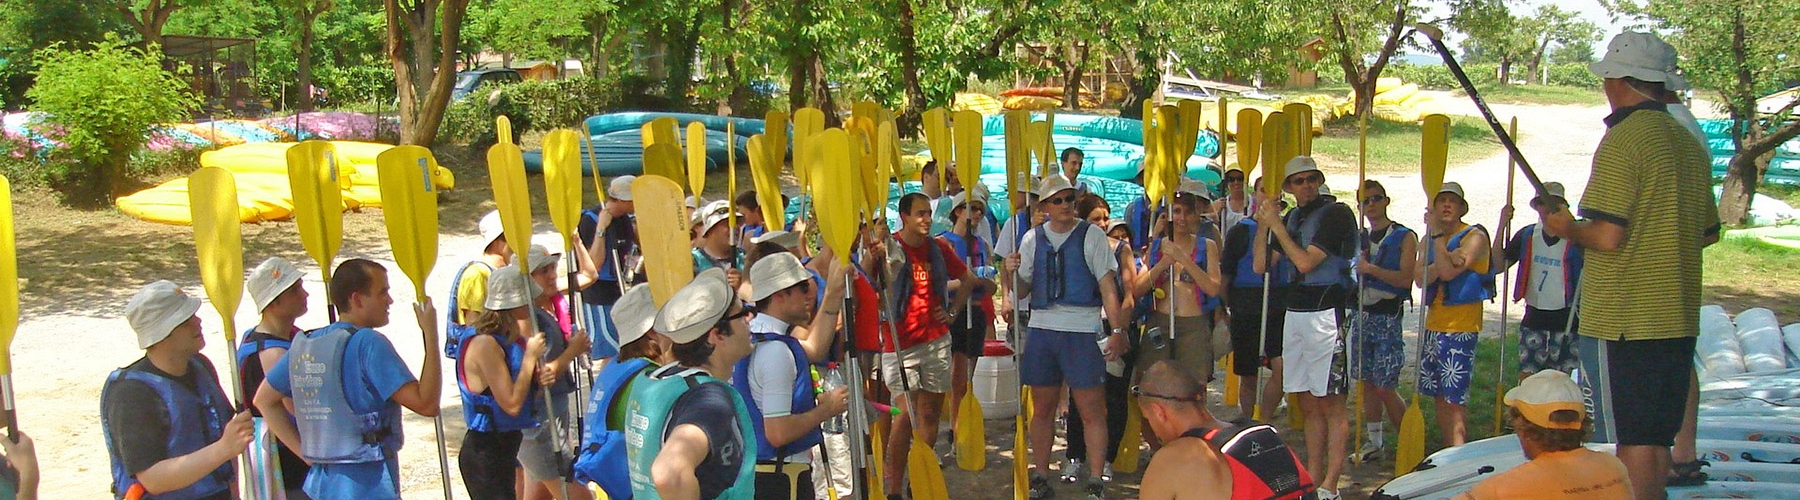 Seminar in Ardèche : Canoe challenge and a Walk to the centre of the Earth